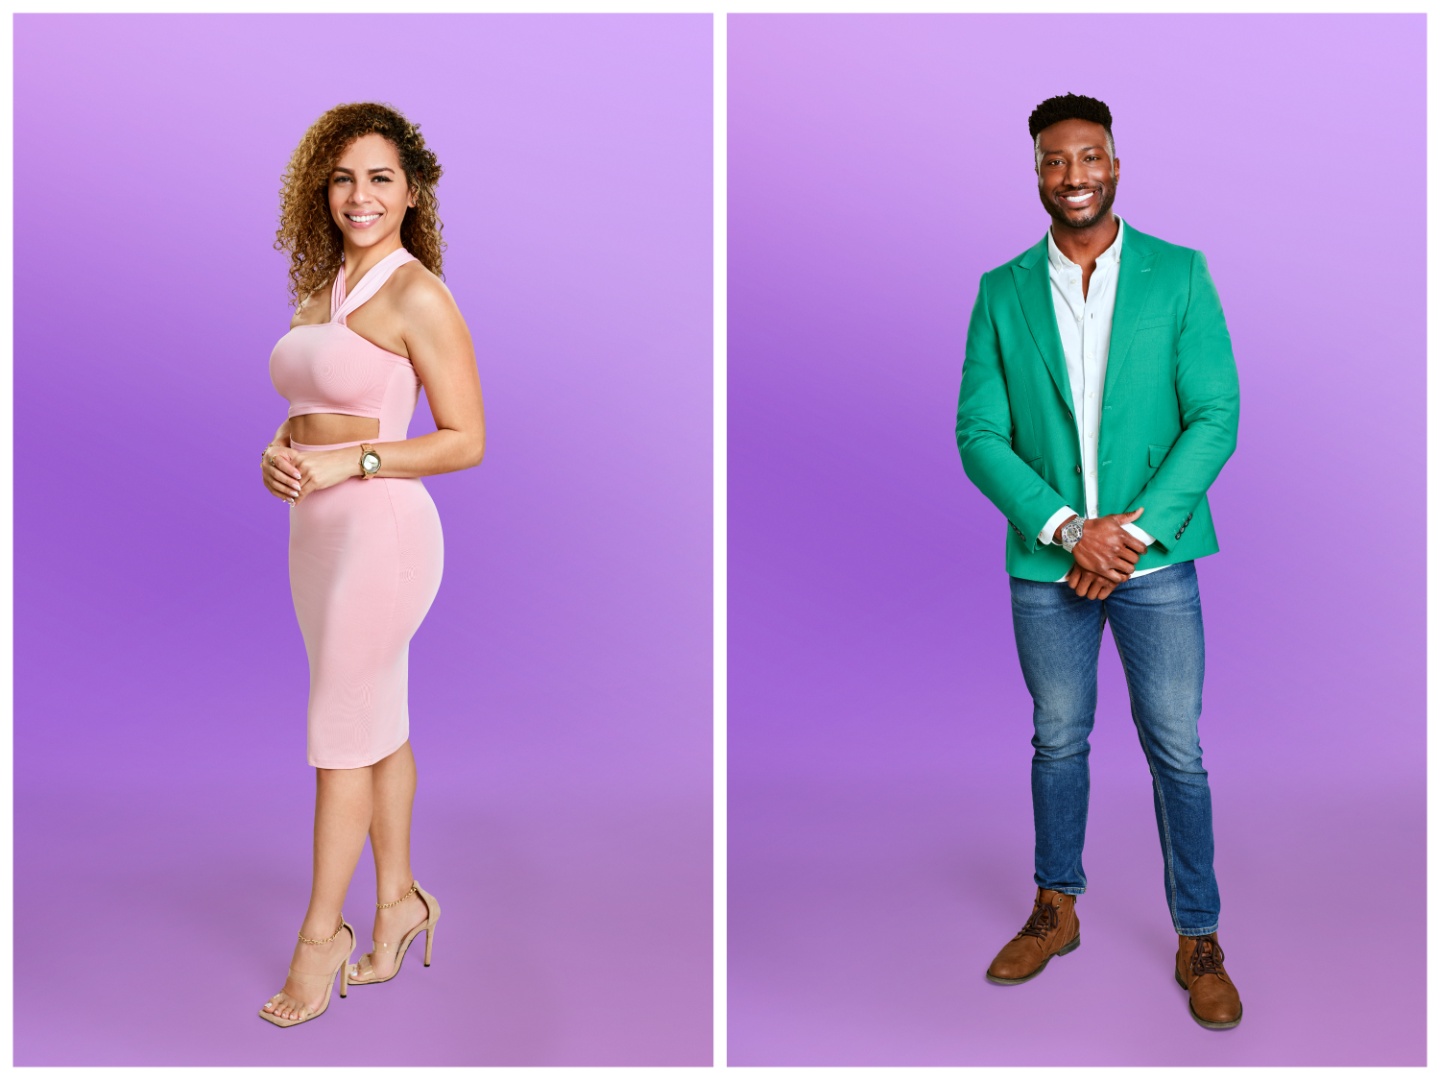 Portraits of Lydia and Uche on purple backgrounds from 'Love Is Blind' Season 5